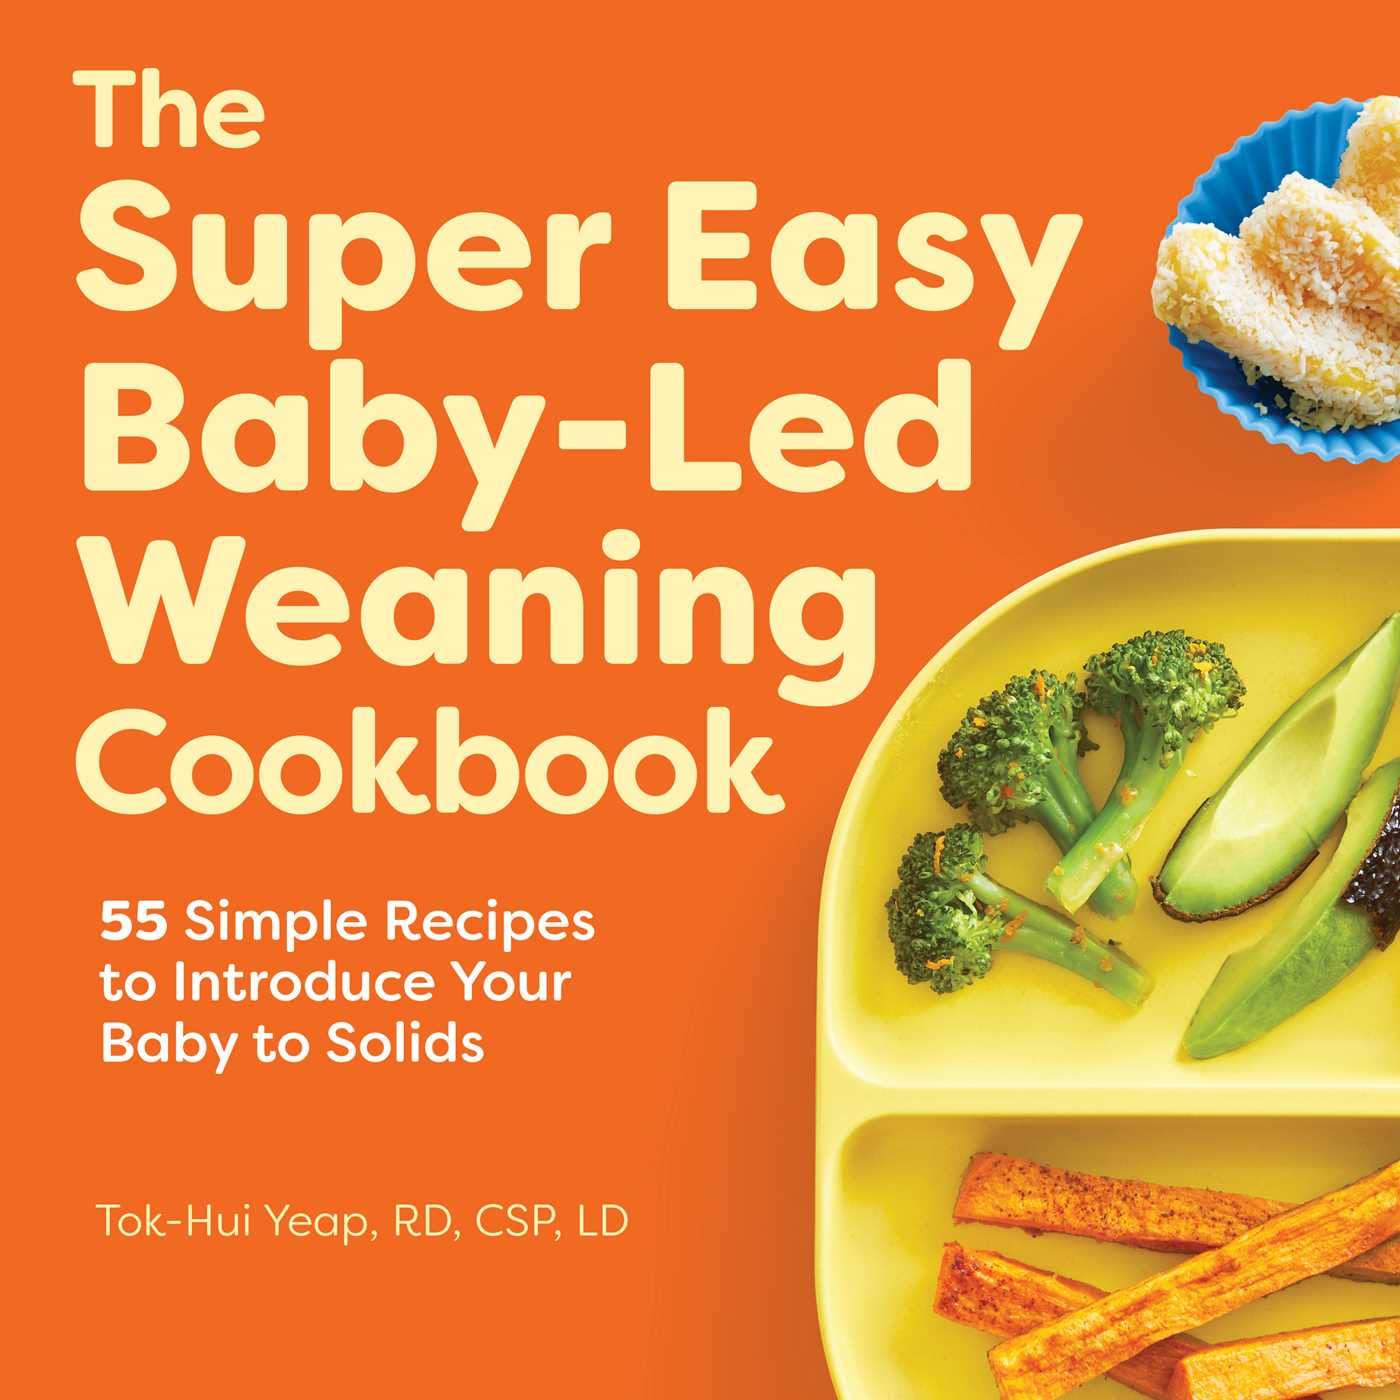 The Super Easy Baby-Led Weaning Cookbook: 55 Simple Recipes to Introduce Your Baby to Solids (Tok-Hui Yeap)